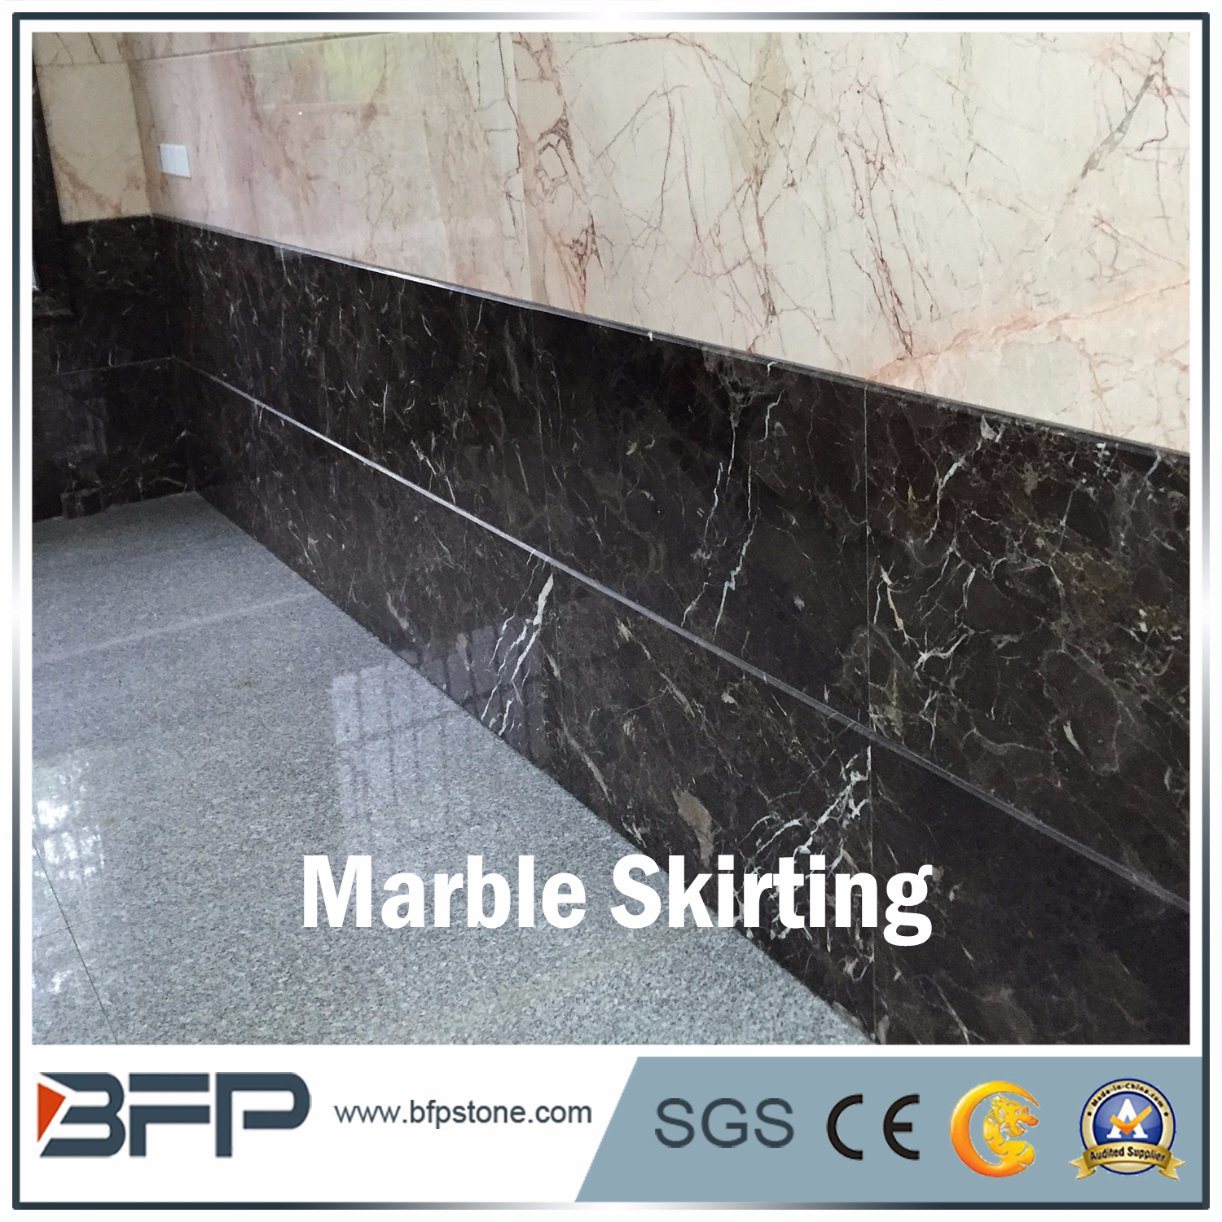 Chinese Coffee Net Vein Marble for Skirting in Home Decoration